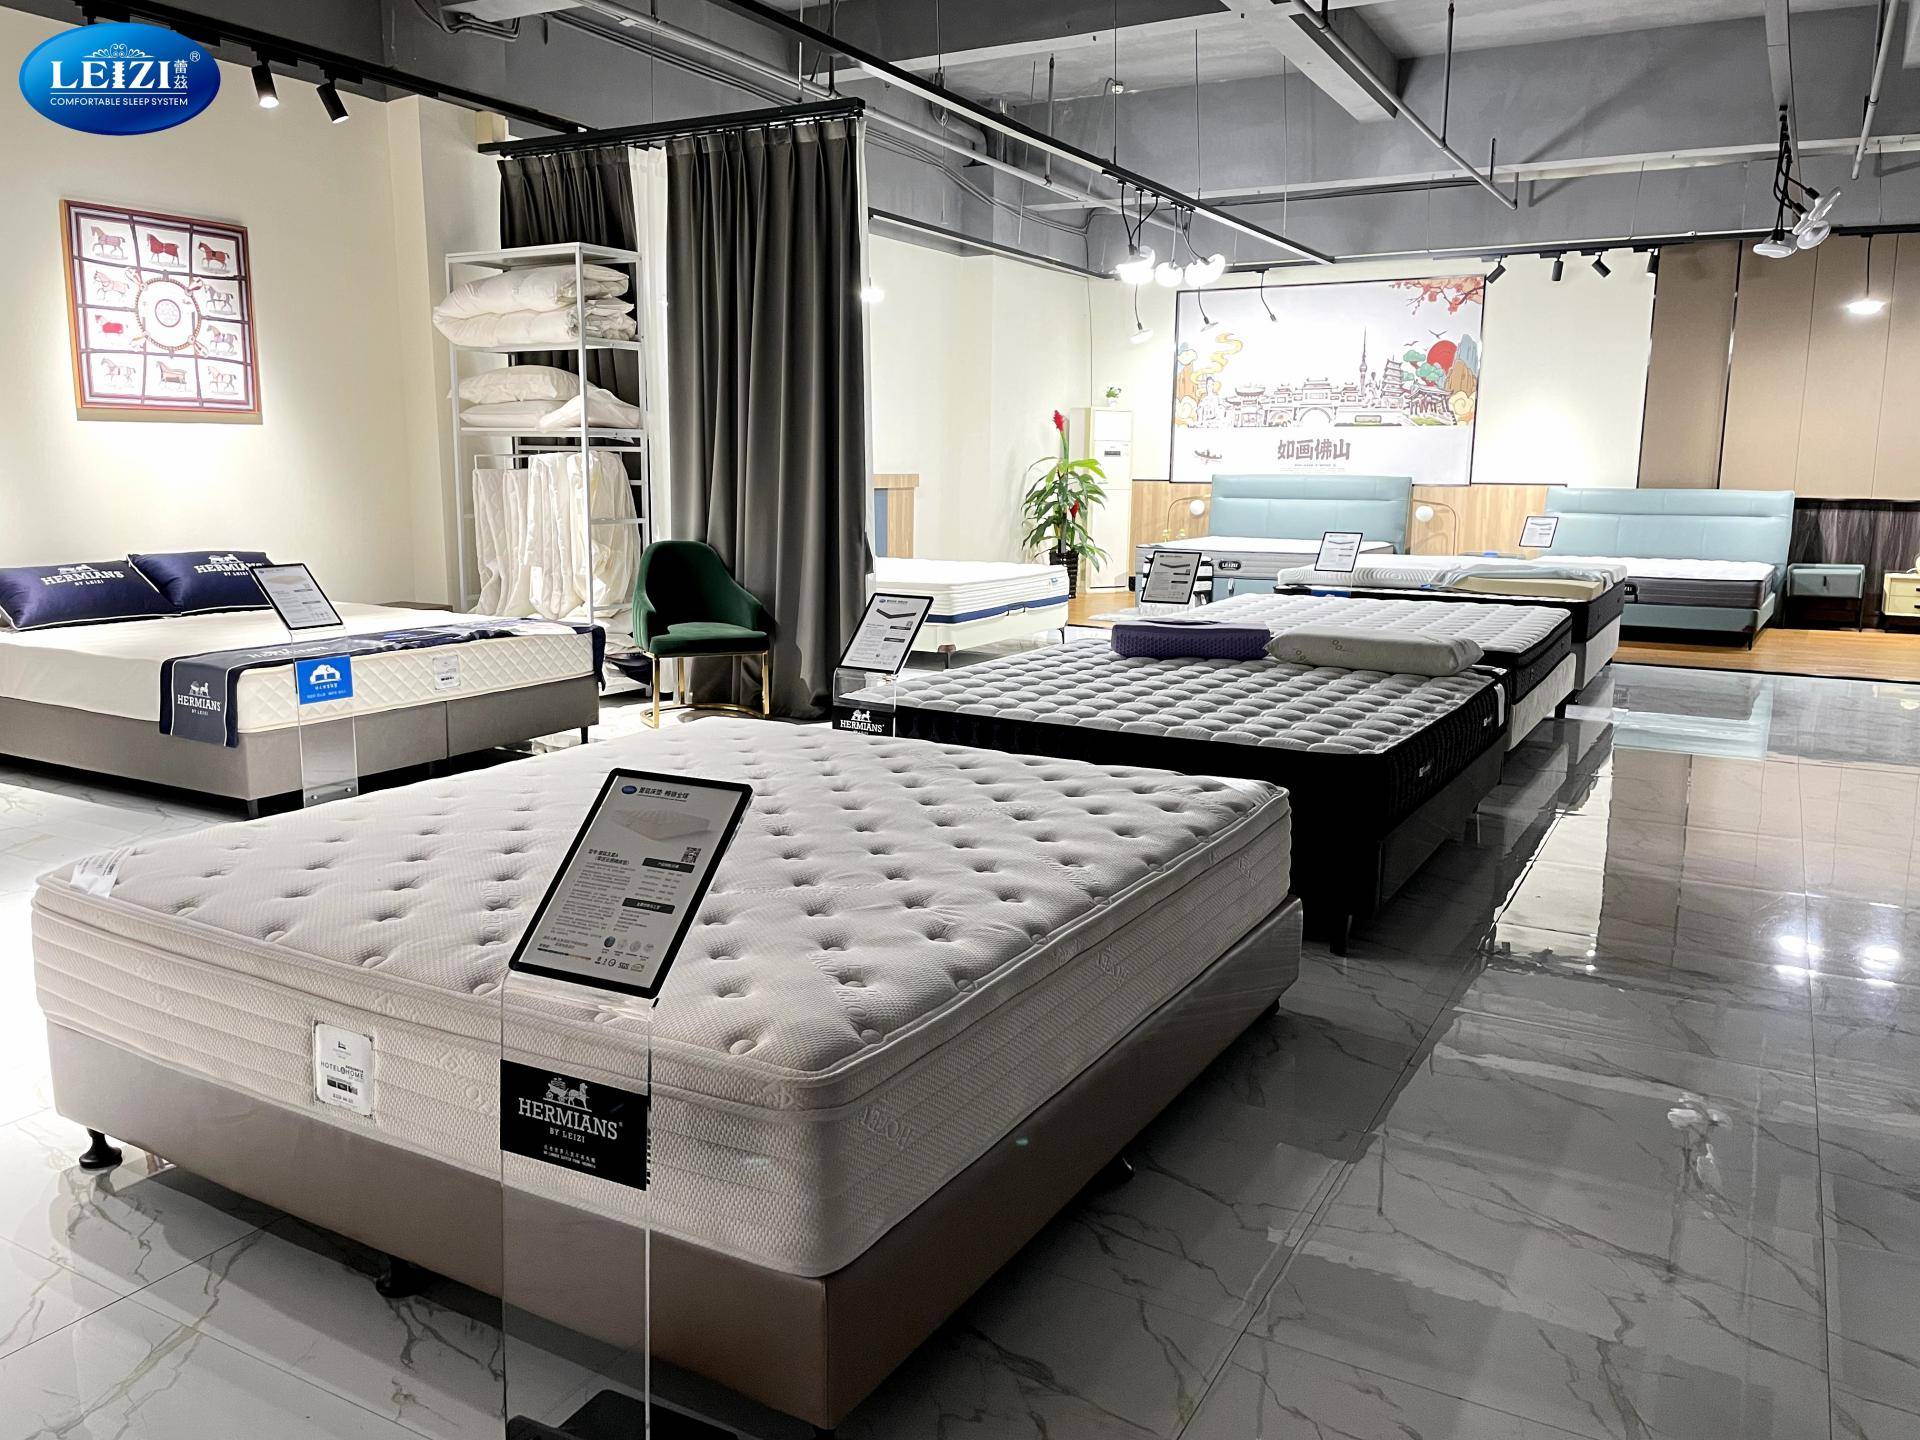 How To Buy: What Is a Pocket Sprung Mattress?